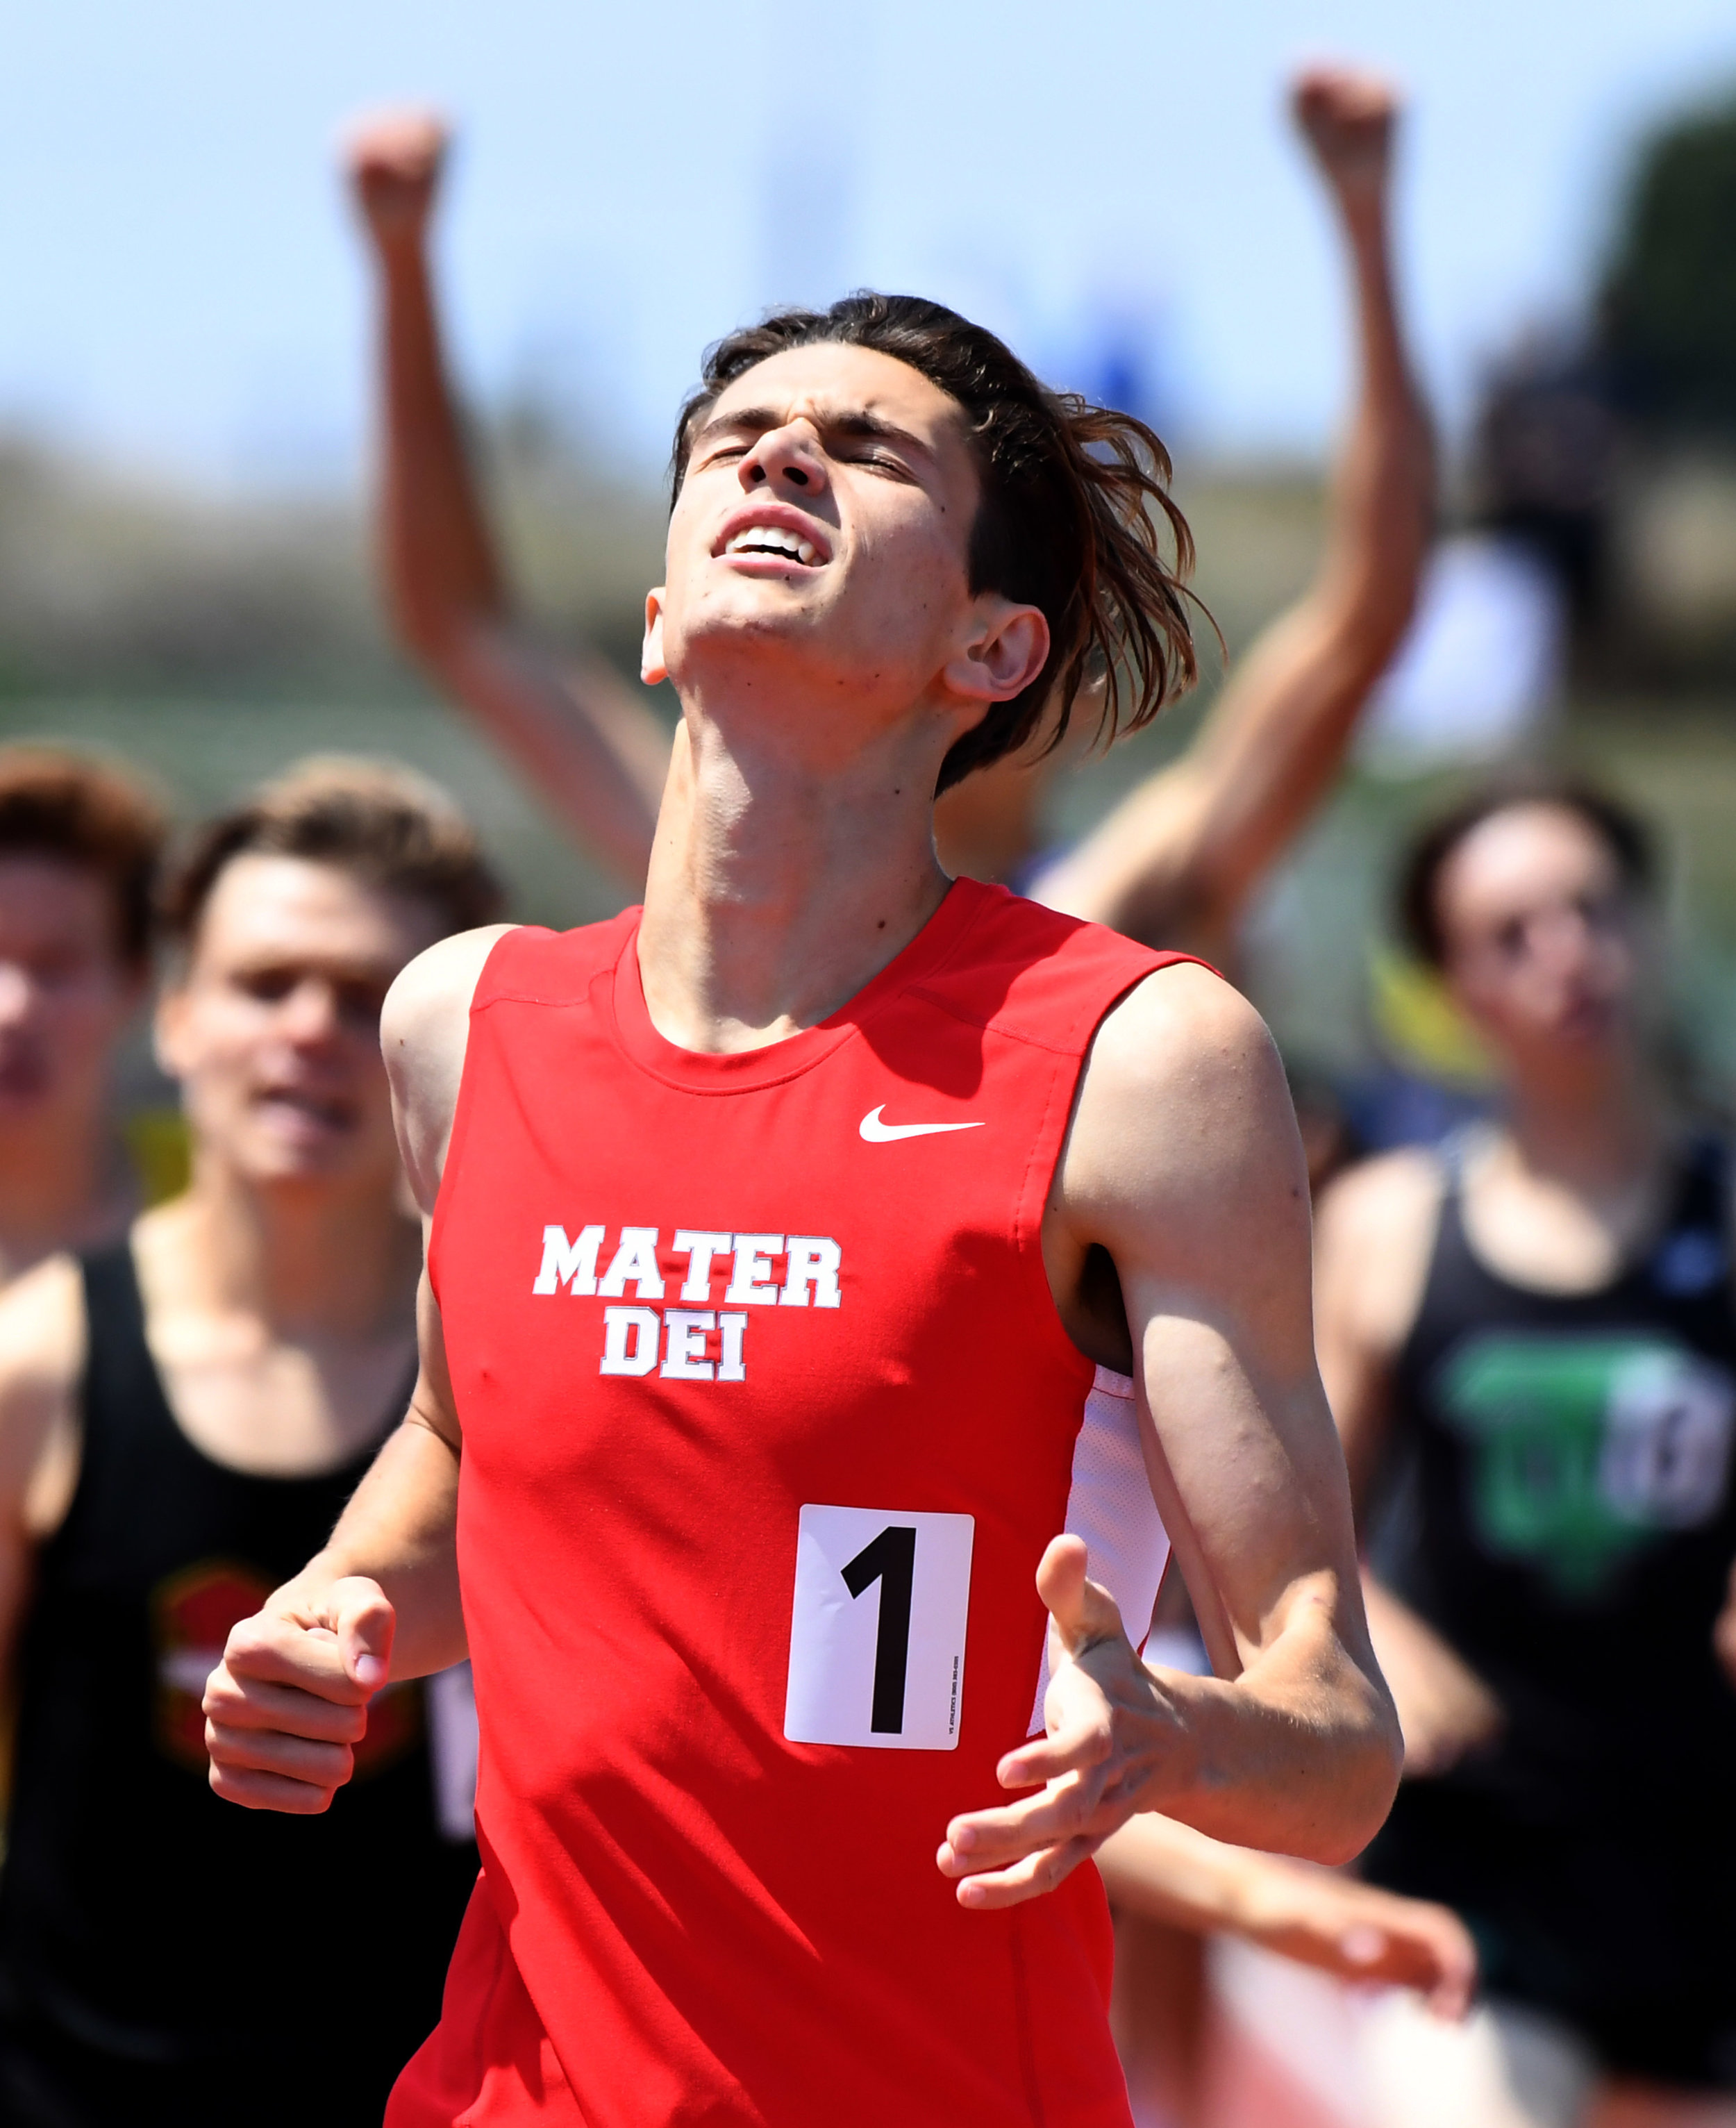  Mater Dei;s Sam VanDorpe wins the 800 meter dash during the CIF-SS Track and Field Masters meet at El Camino College in Torrance, Calif., on Saturday, May 26, 2018.  